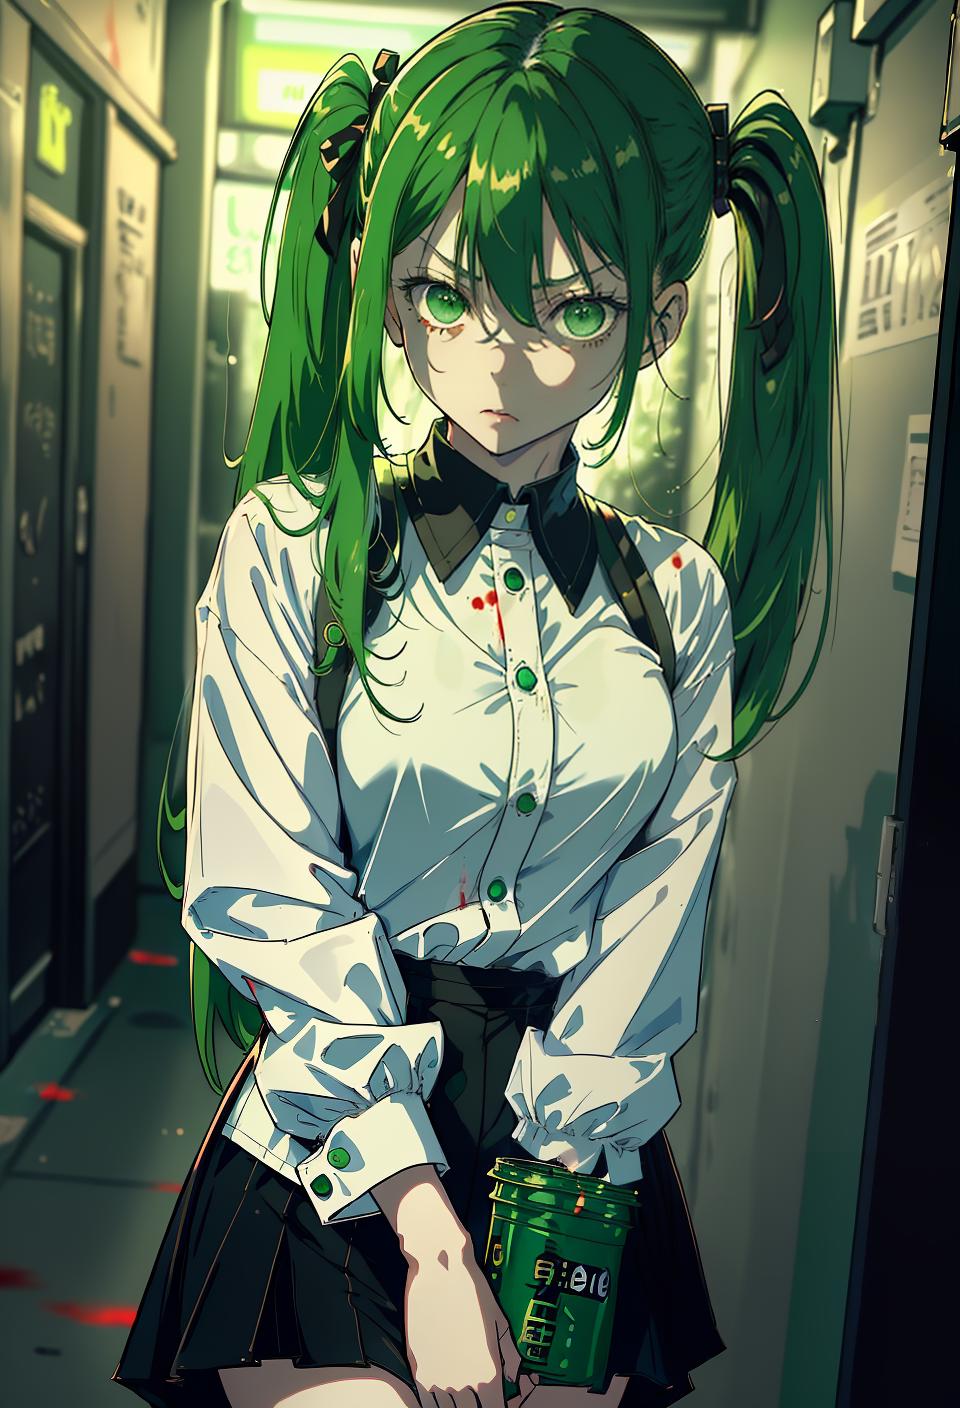  ((trending, highres, masterpiece, cinematic shot)), 1girl, young, female date attire, blood, violent crime scene, medium-length straight light green hair, twintails hairstyle, narrow green eyes, antisocial, loner personality, mischievous expression, very pale skin, epic, observant